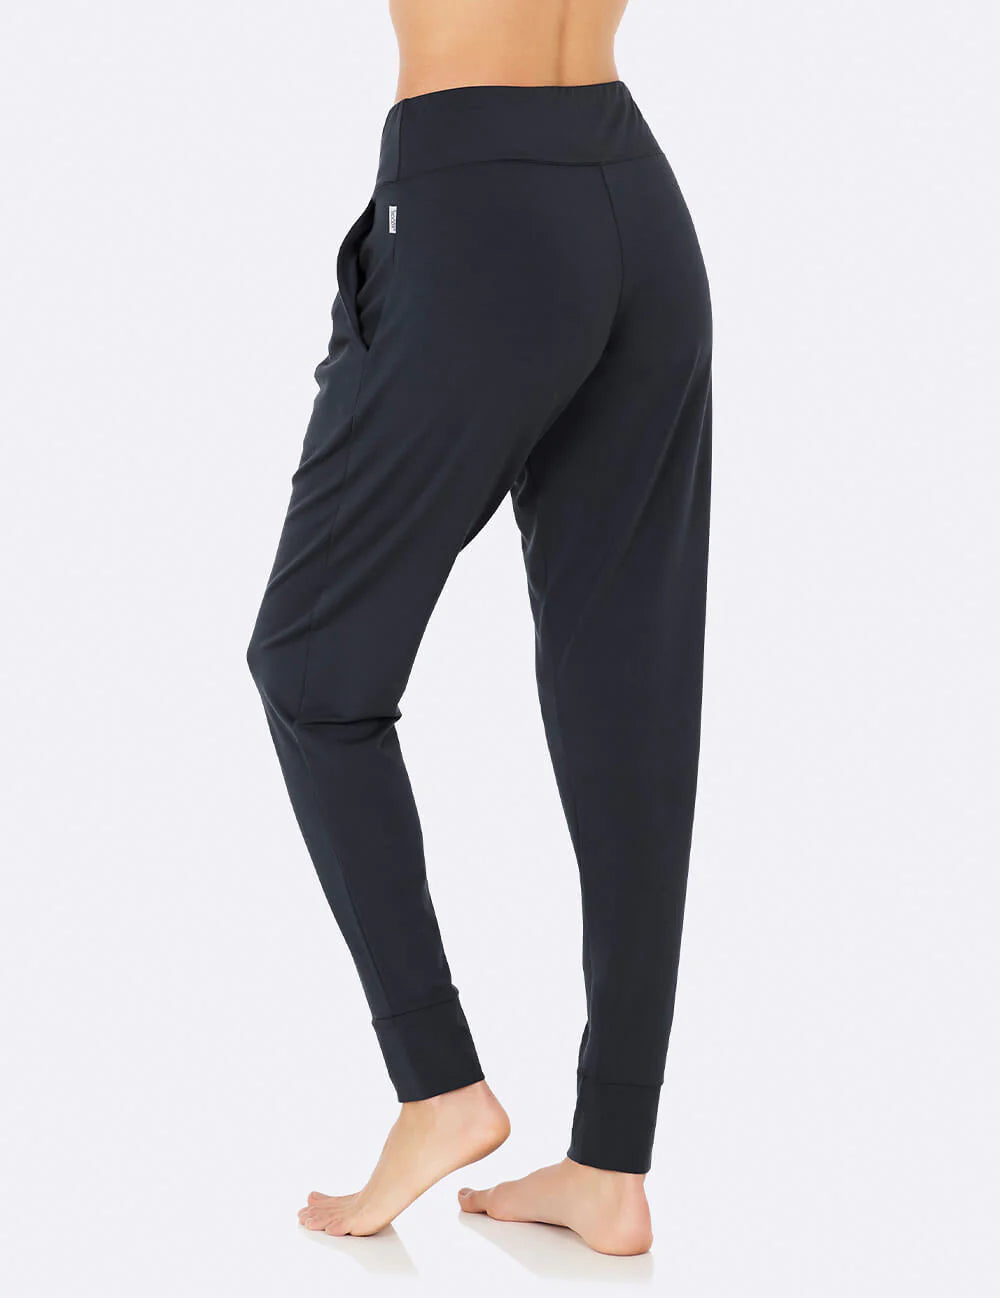 Downtime Pant